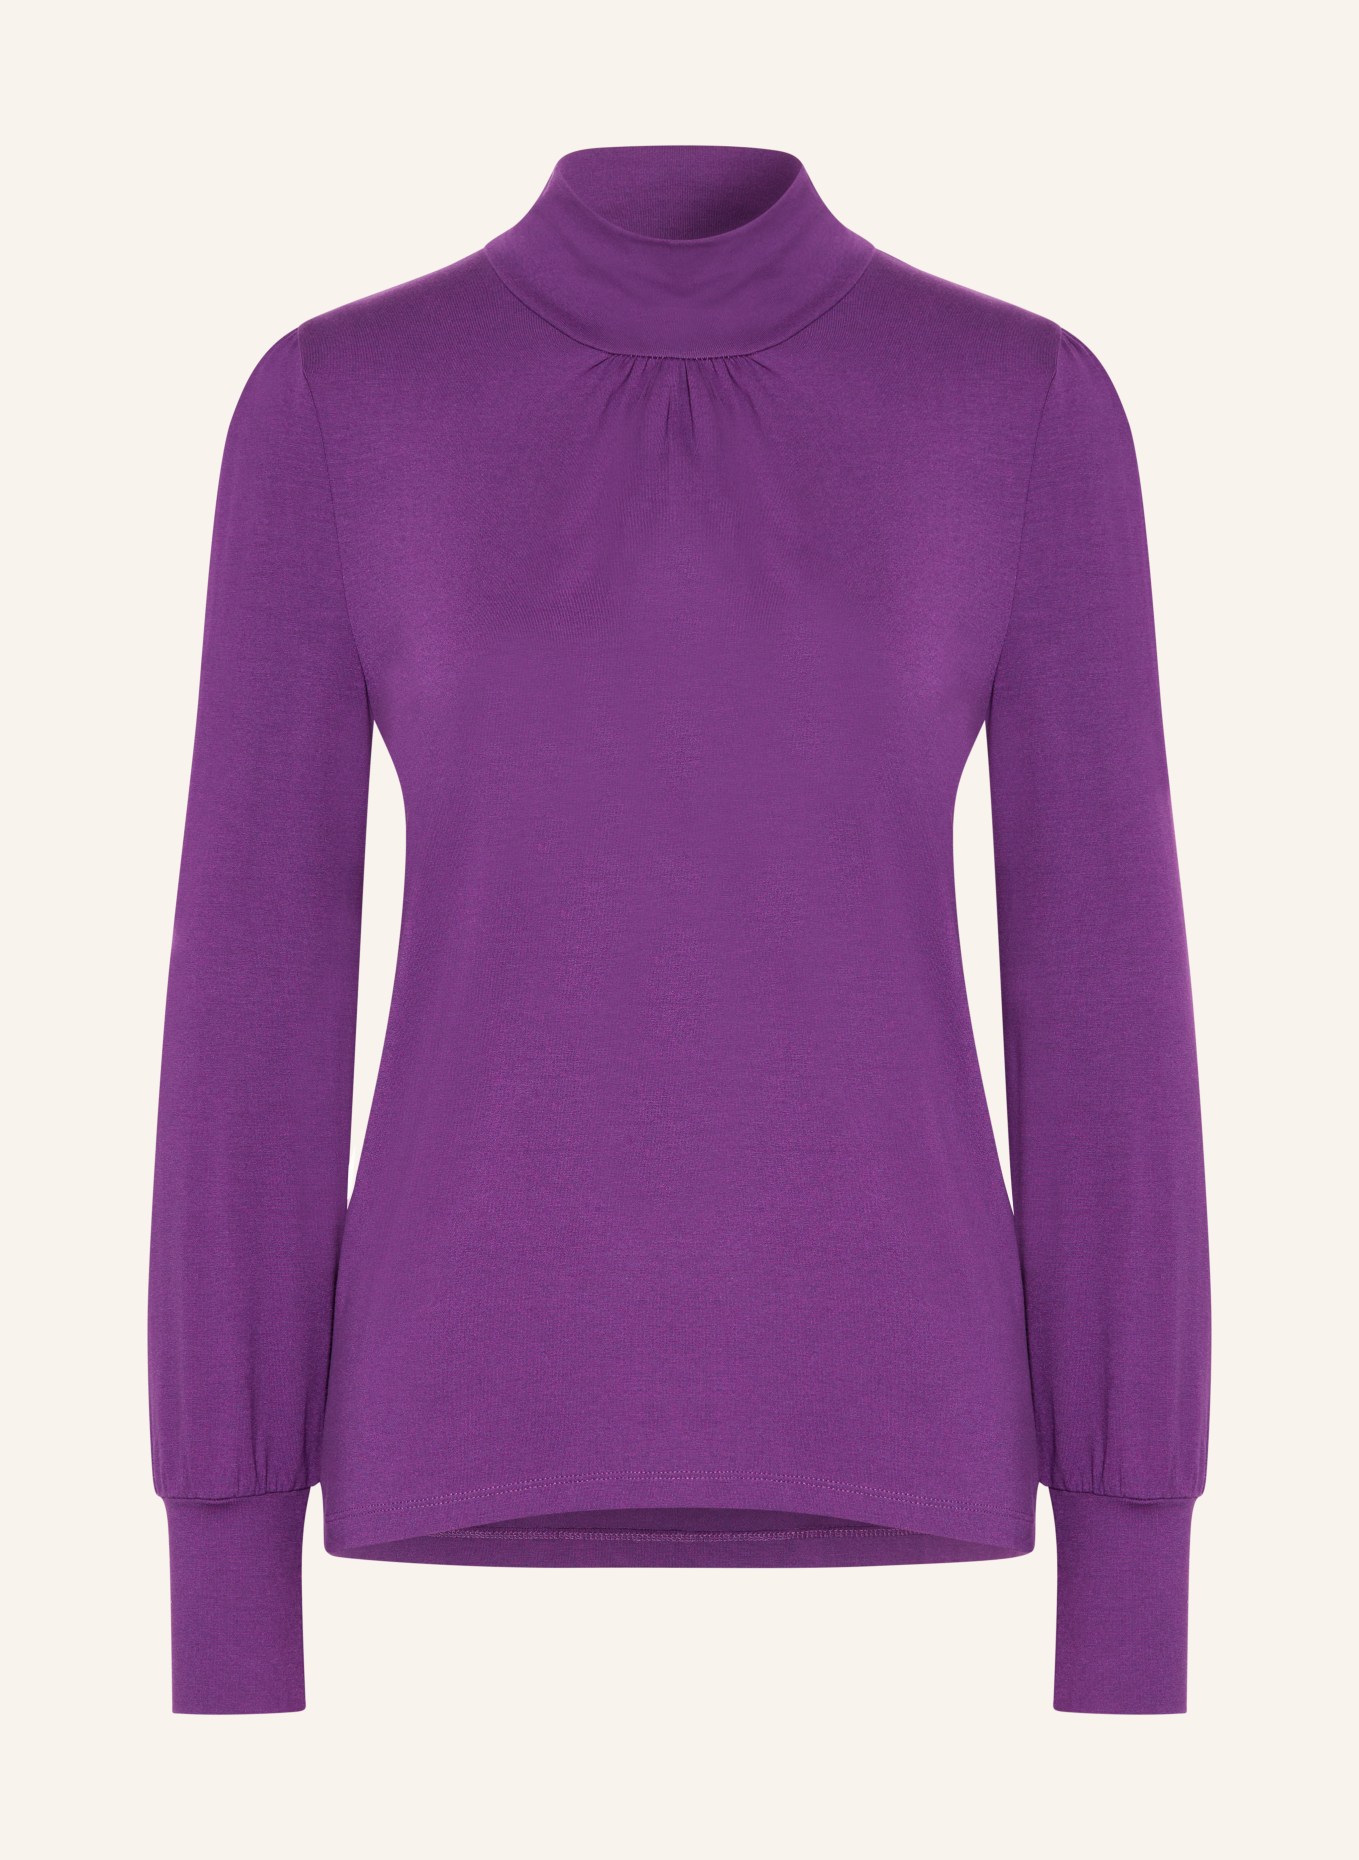 MORE & MORE Shirt blouse made of jersey, Color: DARK PURPLE (Image 1)